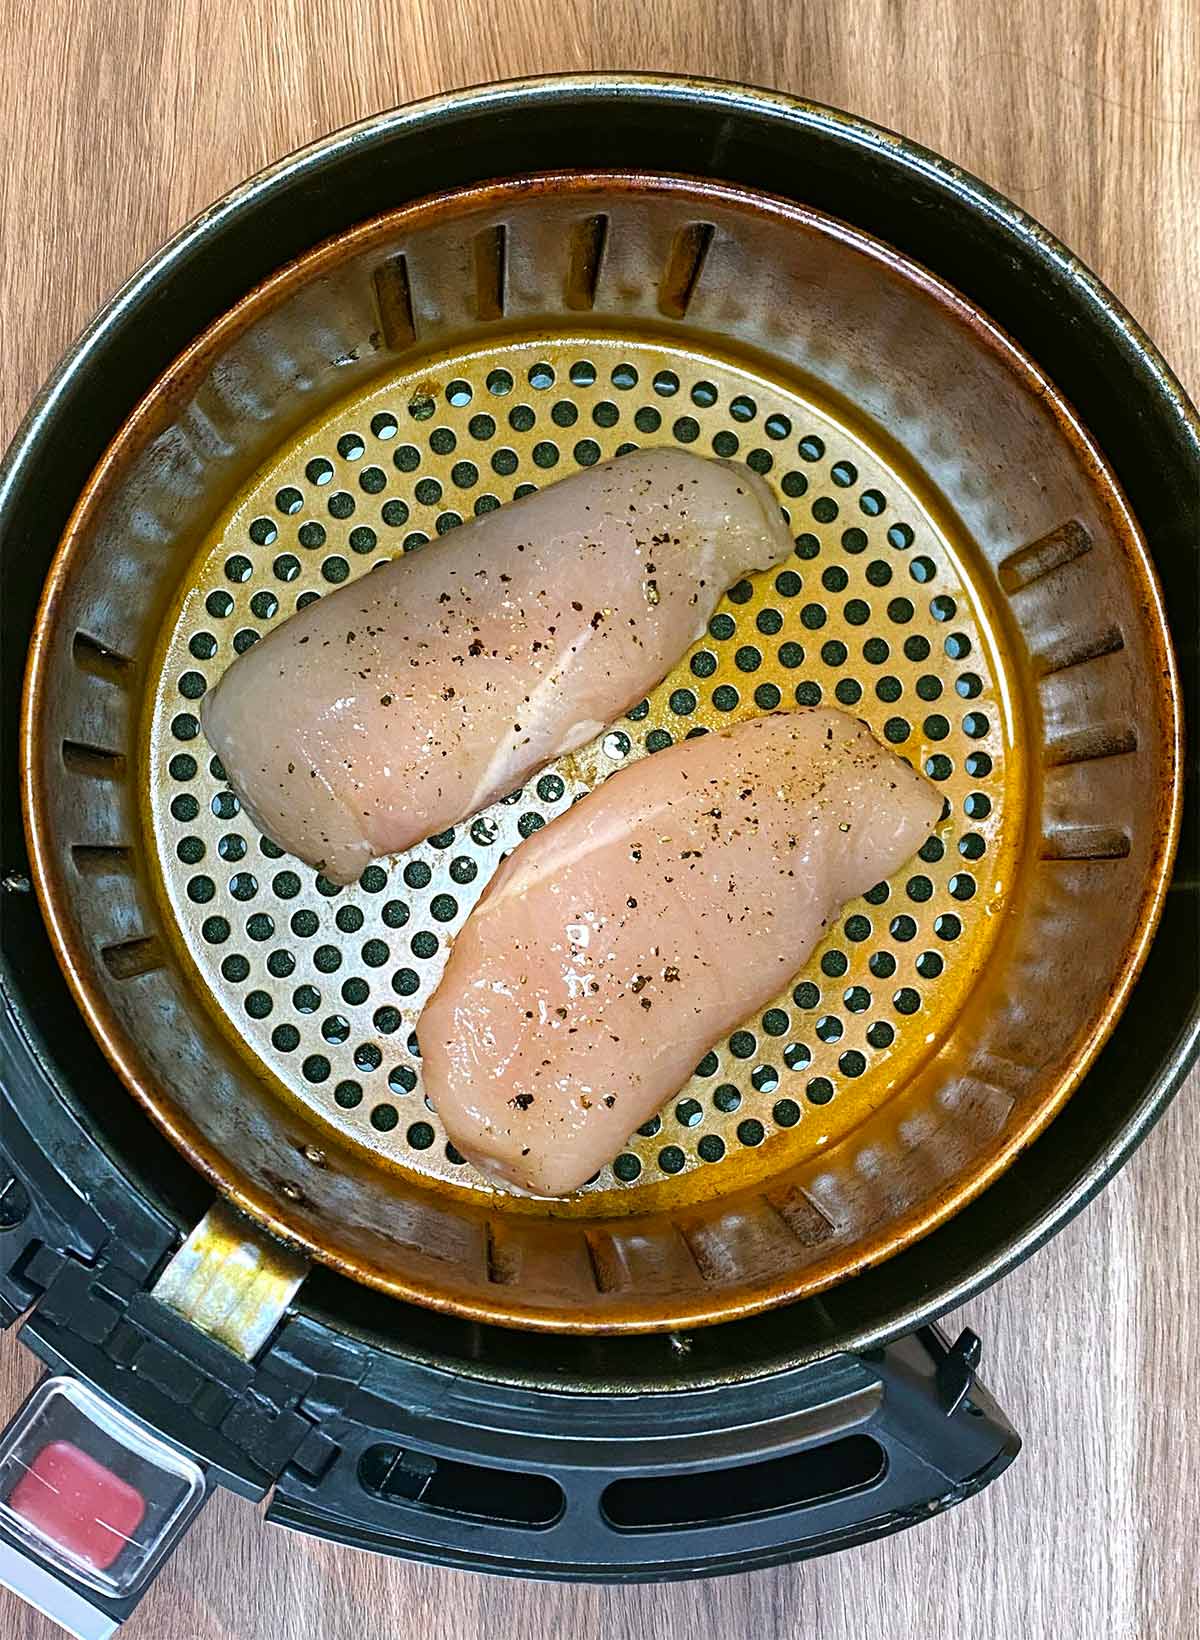 Two chicken breasts in an air fryer basket.